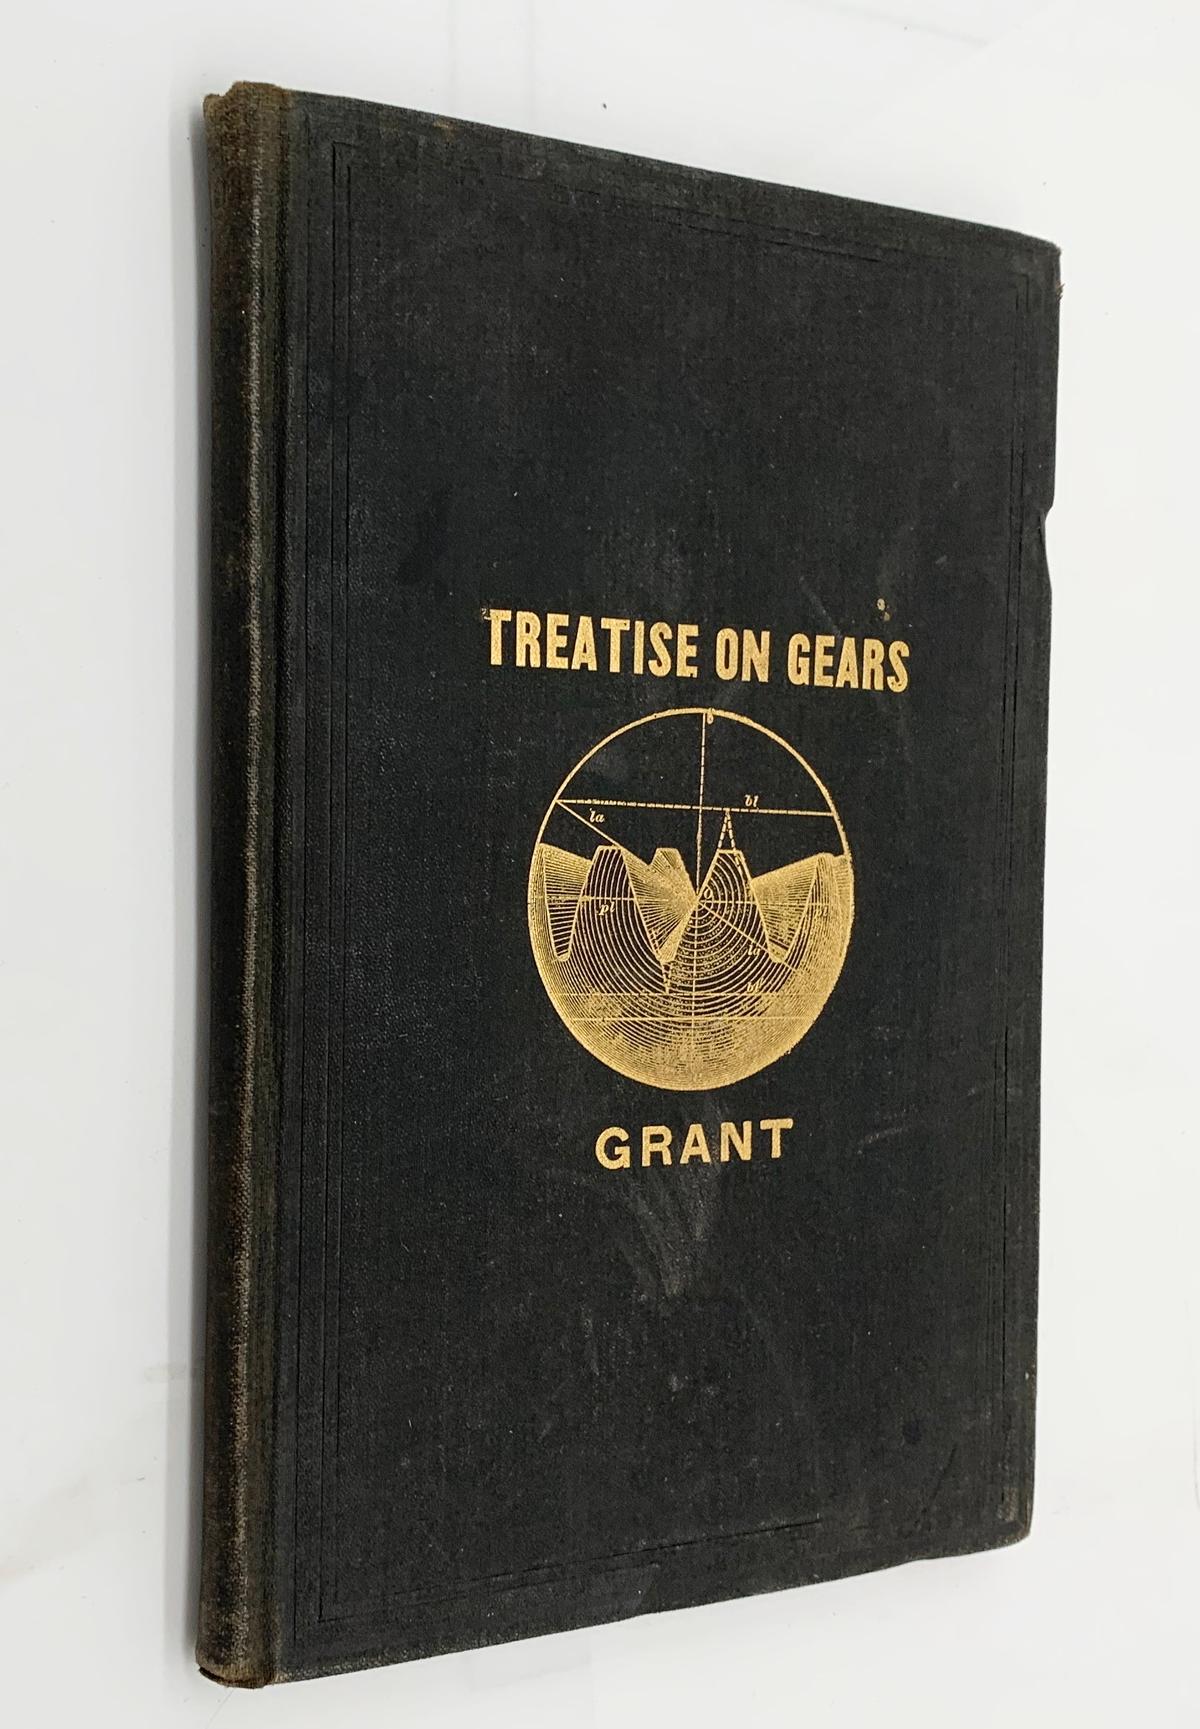 A Treatise on GEAR WHEELS (1897) by George B. Grant - Illustrated with Advertising